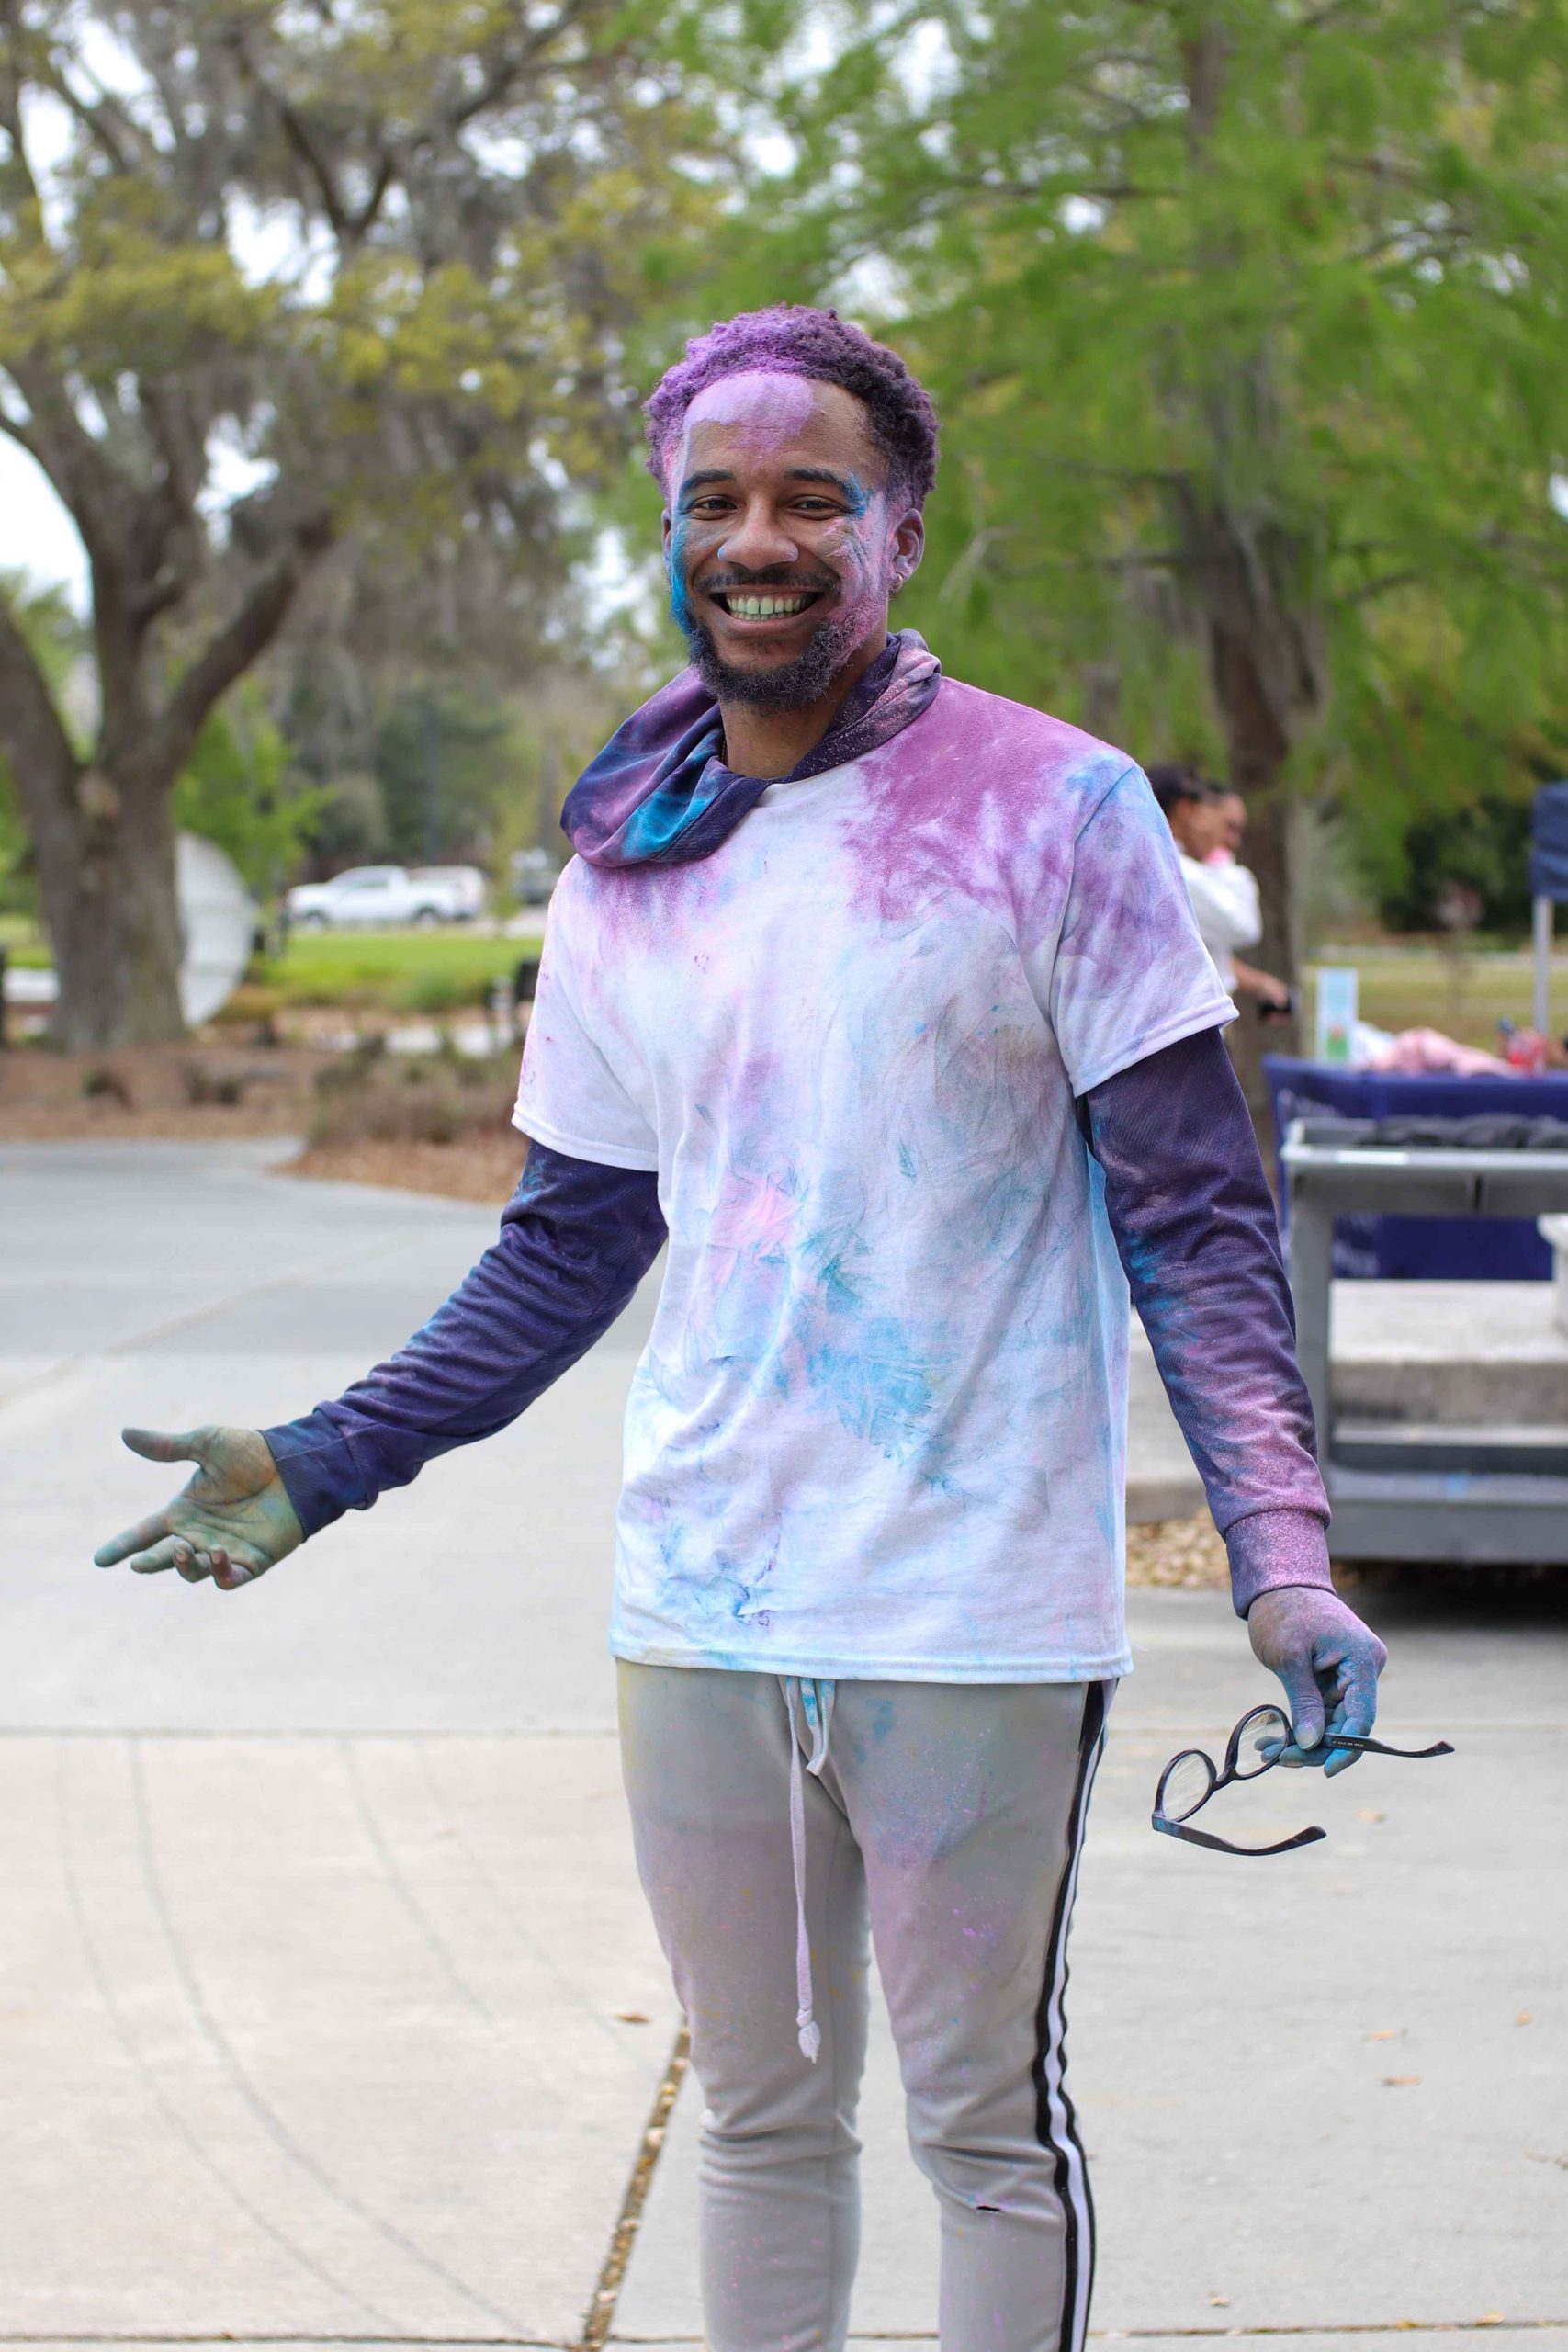 Photo+Gallery+3-26-24%3A+Armstrong+Celebrates+Holi